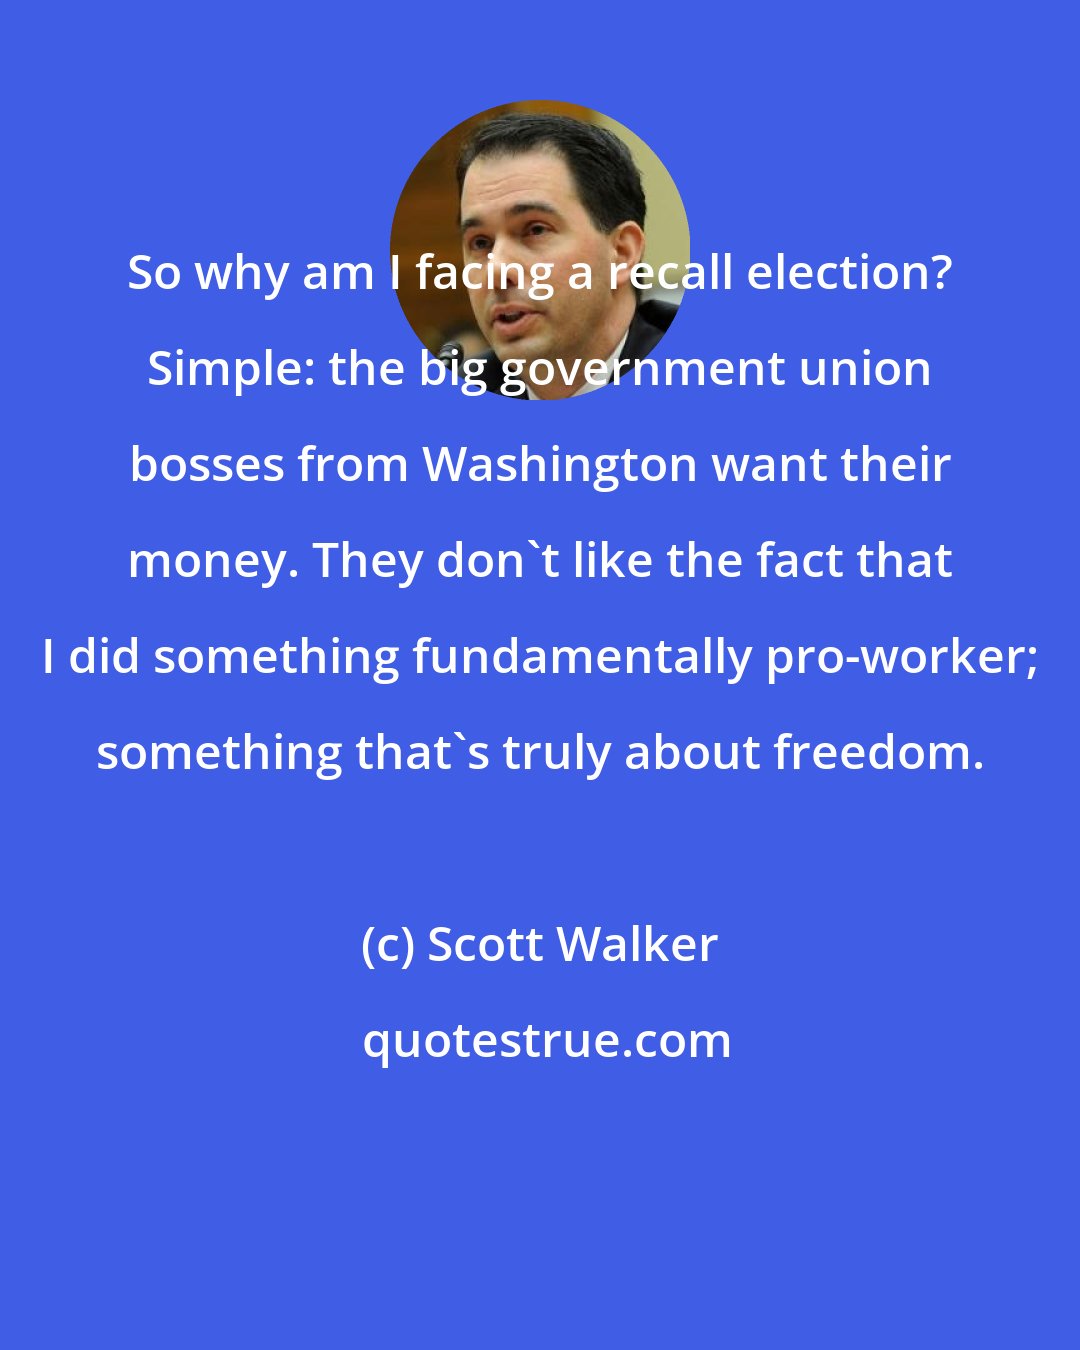 Scott Walker: So why am I facing a recall election? Simple: the big government union bosses from Washington want their money. They don't like the fact that I did something fundamentally pro-worker; something that's truly about freedom.